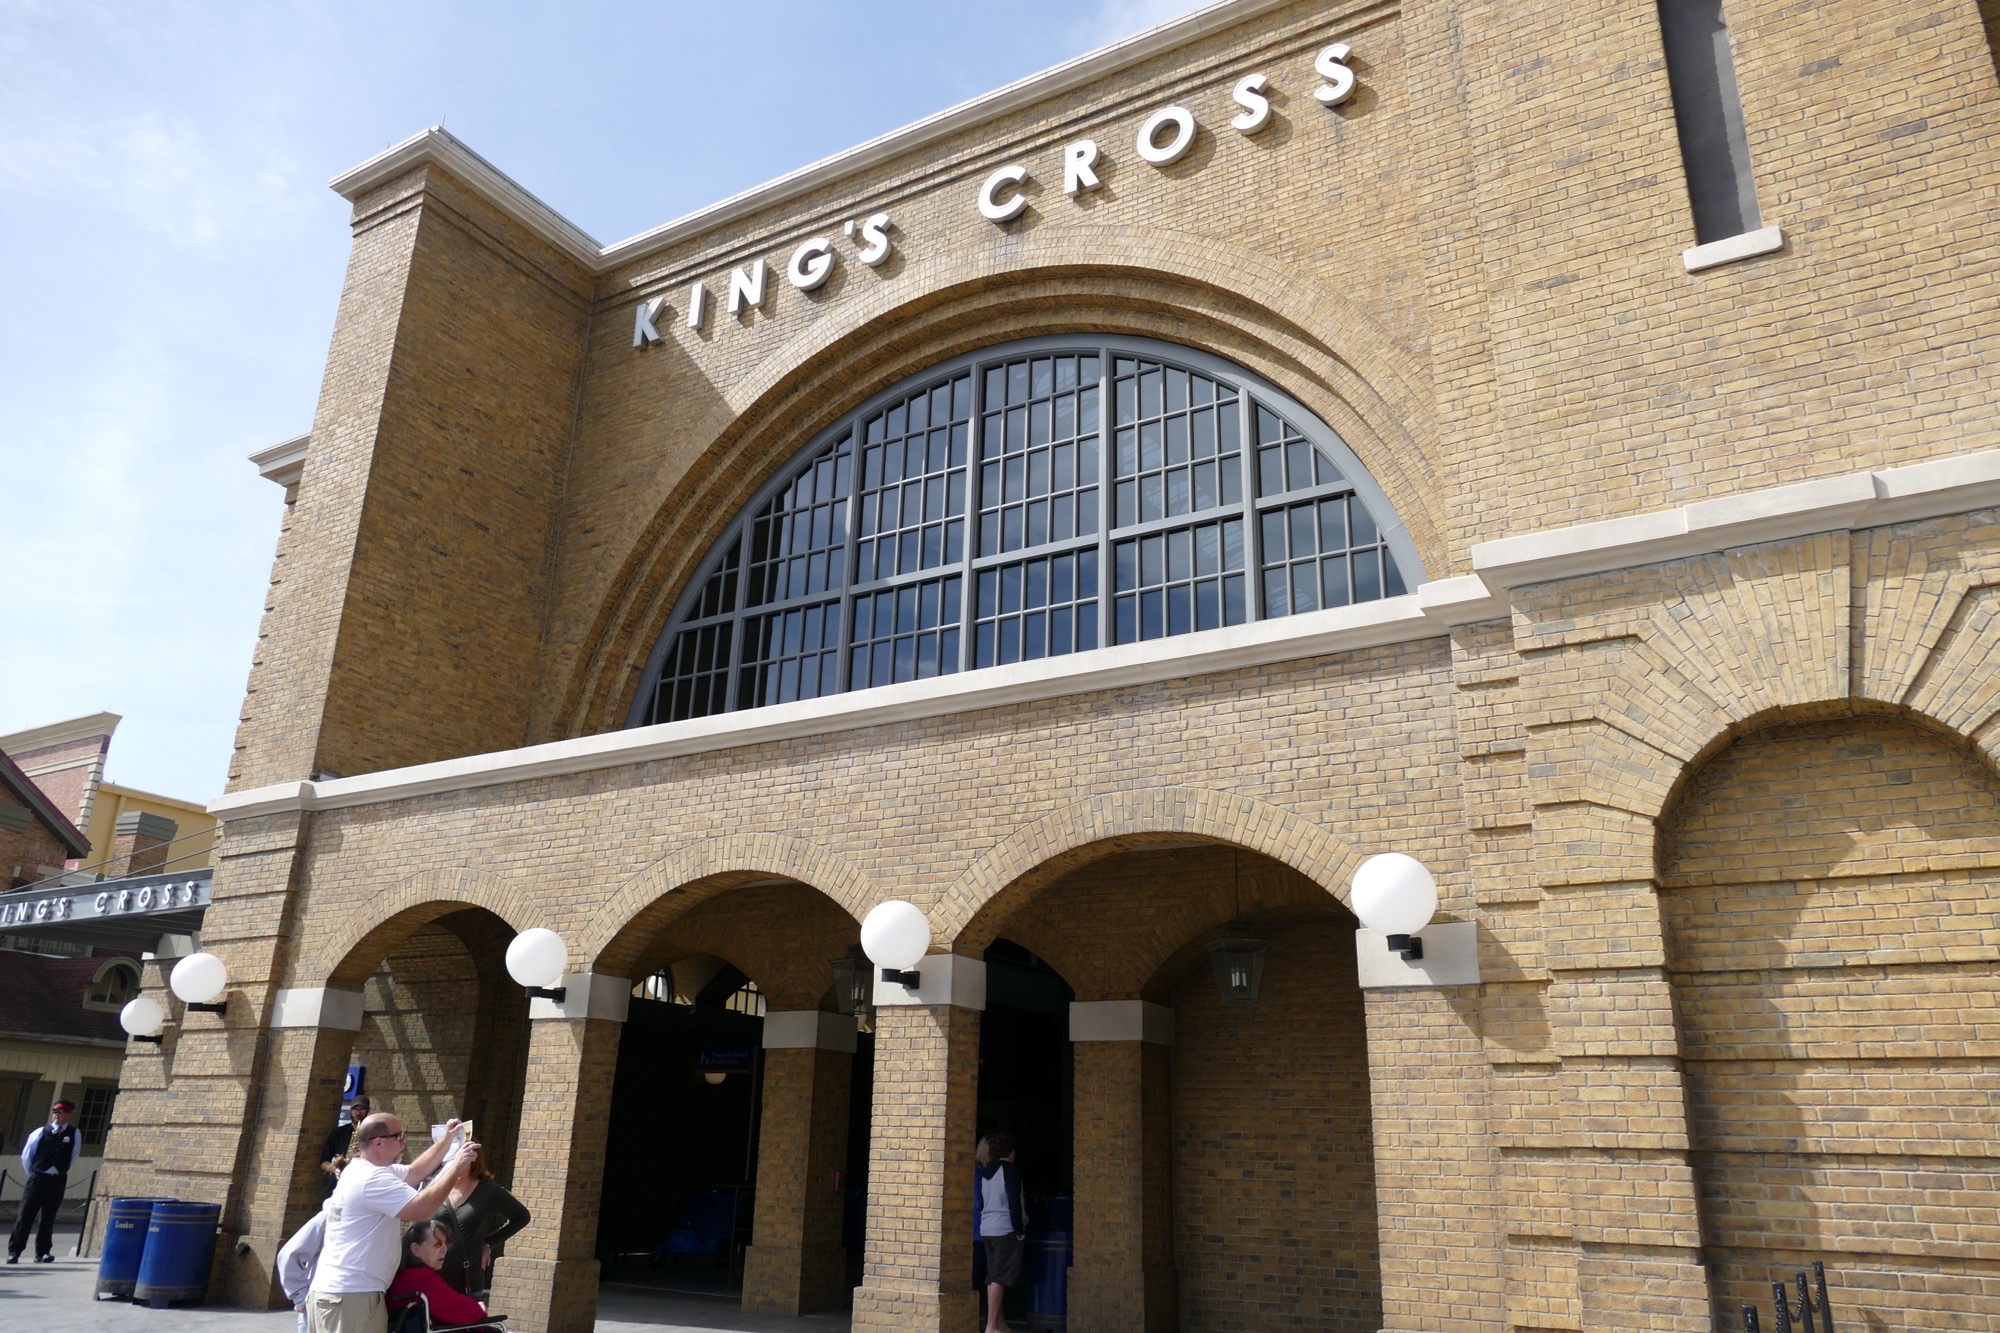 King's Cross Station - Wizarding World of Harry Potter at Universal Studios